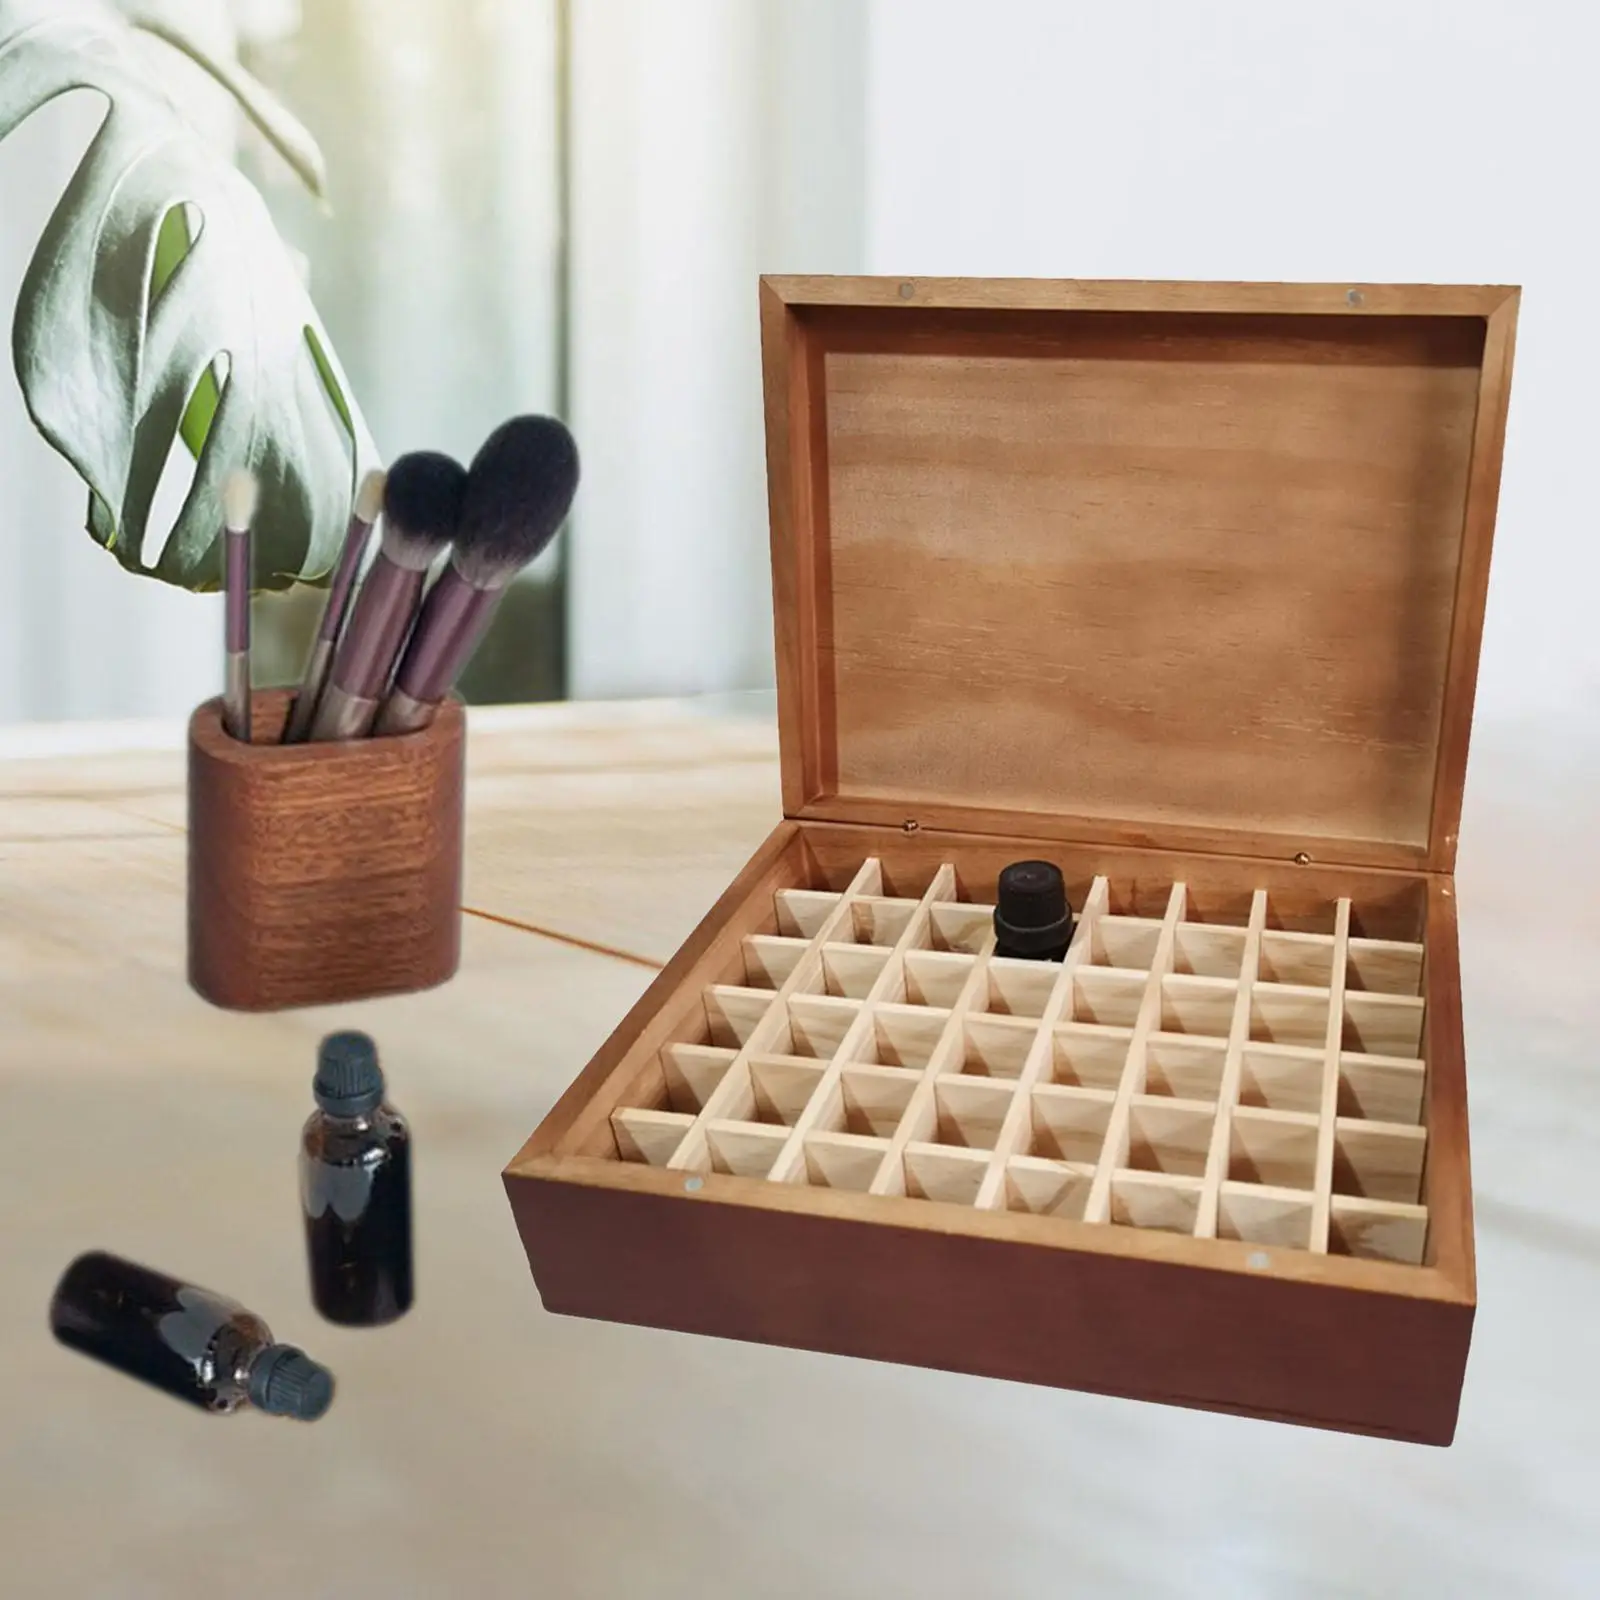 Essential Oil Storage Box 48 Slots 5ml Showing Collection Container Wooden